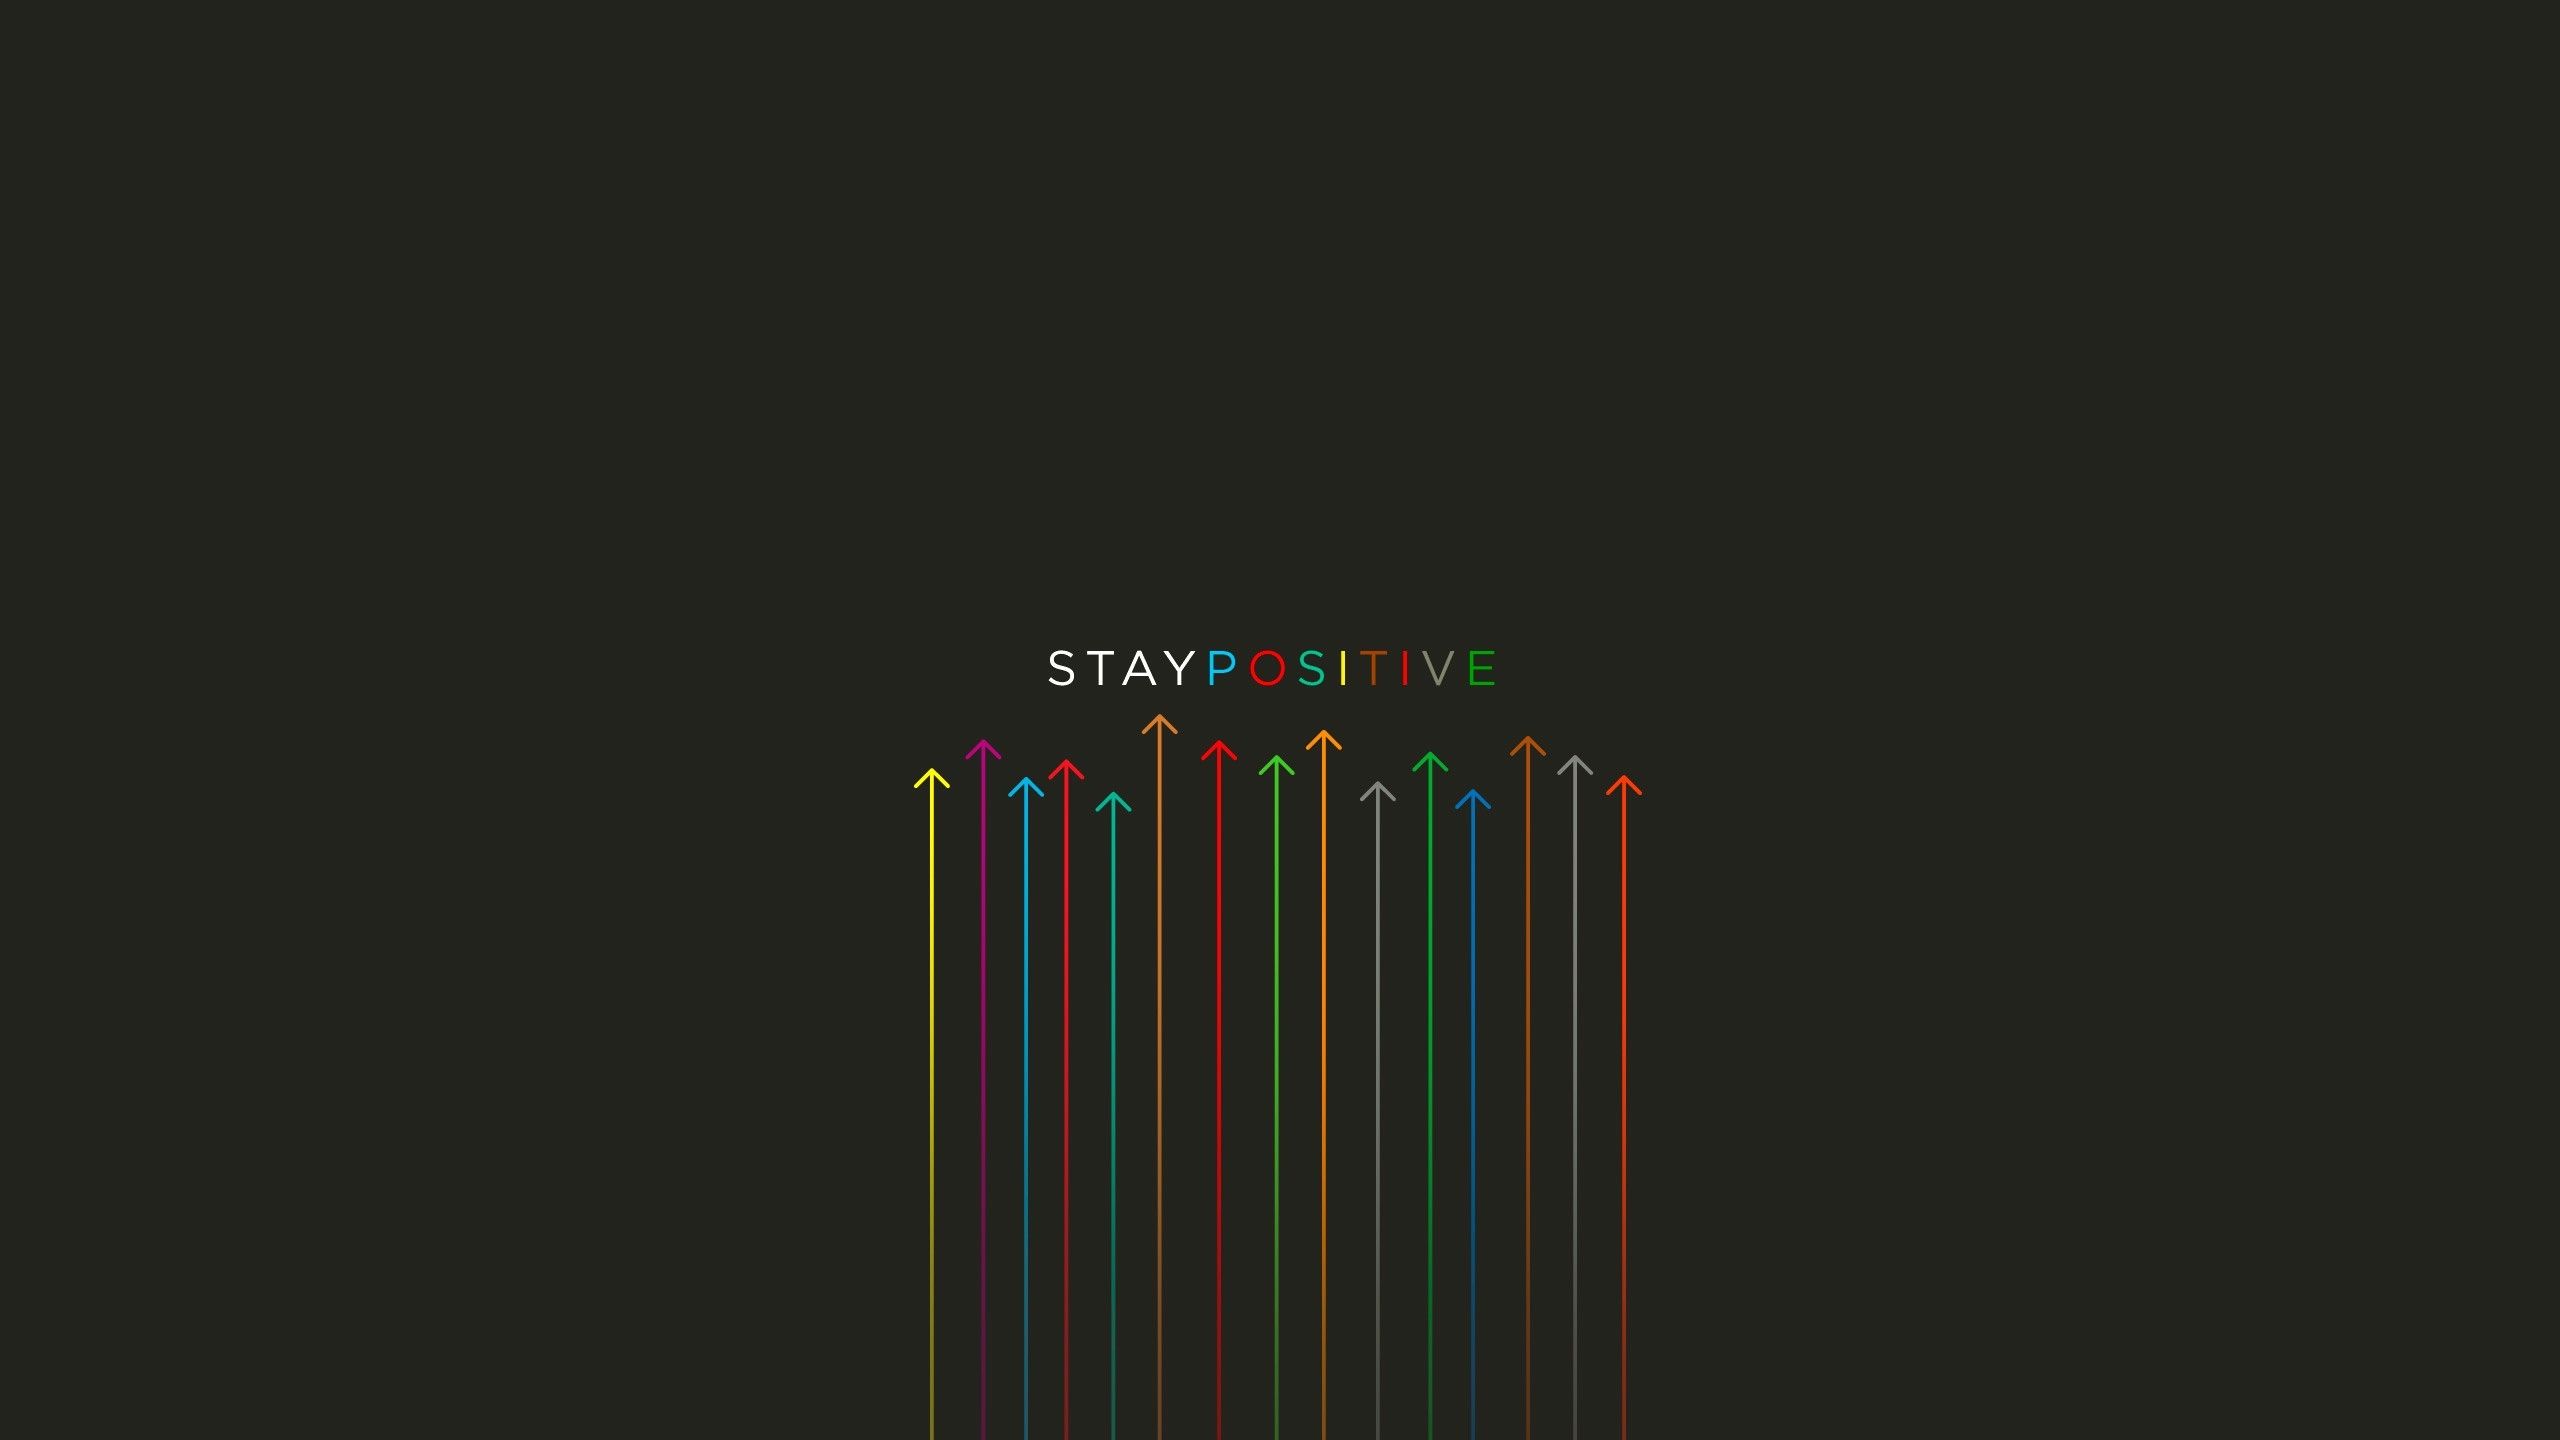 Stay 4K wallpaper for your desktop or mobile screen free and easy to download